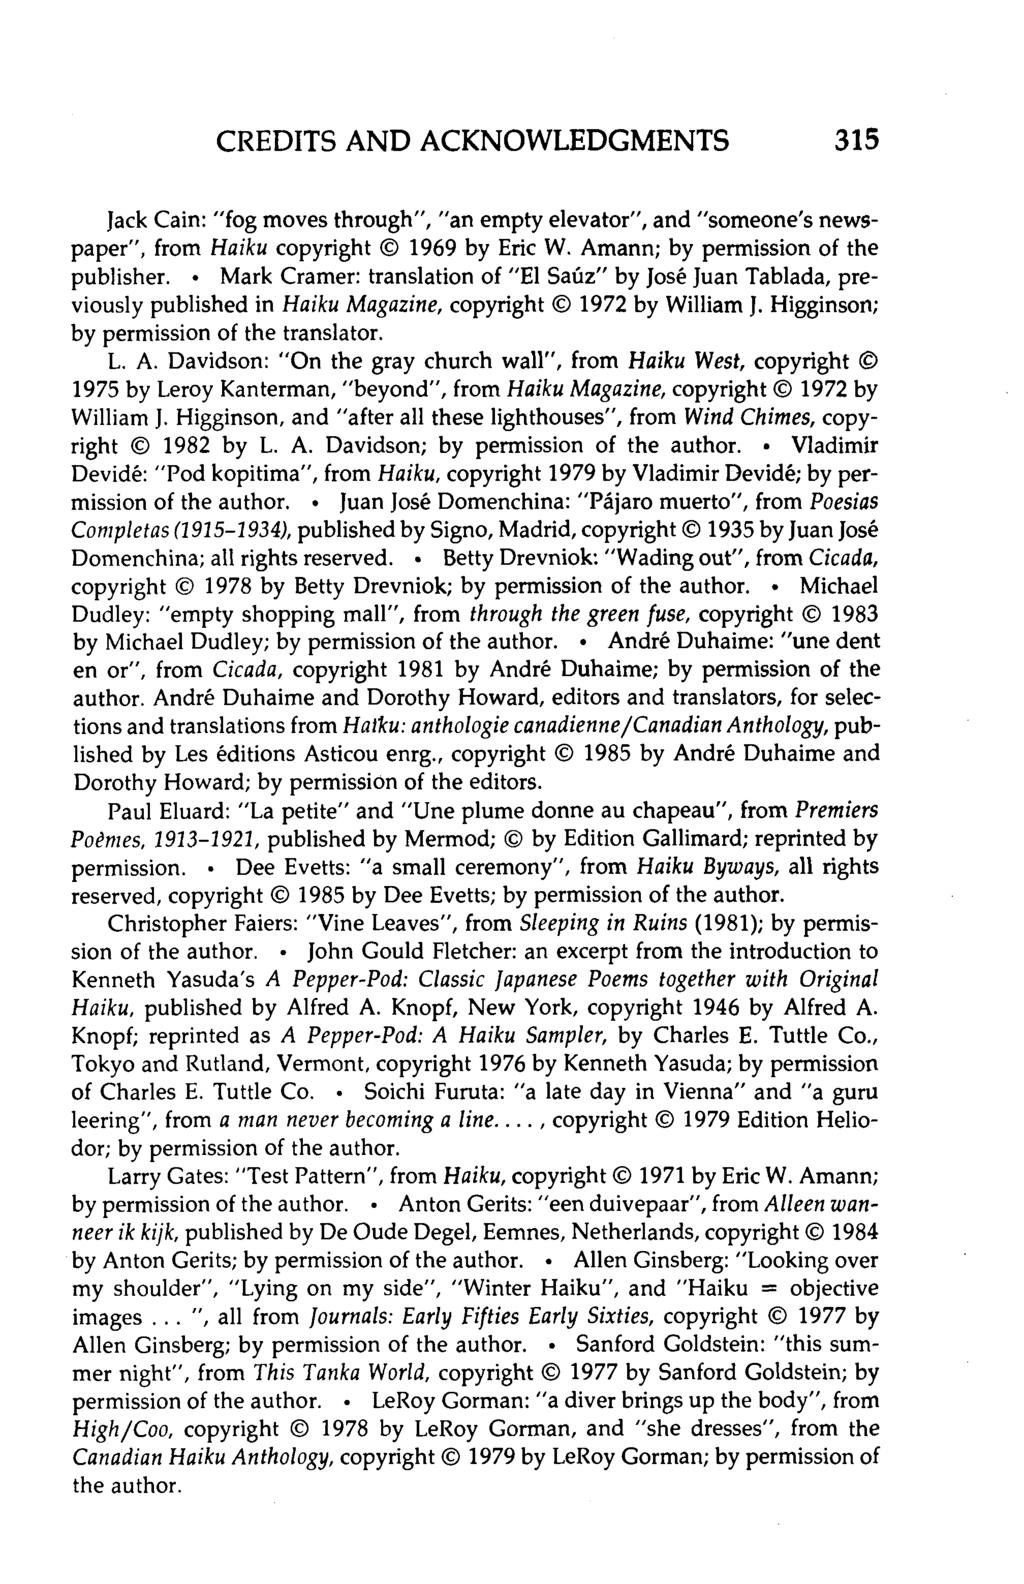 CREDITS AND ACKNOWLEDGMENTS 315 Jack Cain: "fog moves through", "an empty elevator", and "someone's newspaper", from Haiku copyright 1969 by Eric W. Amann; by permission of the publisher.